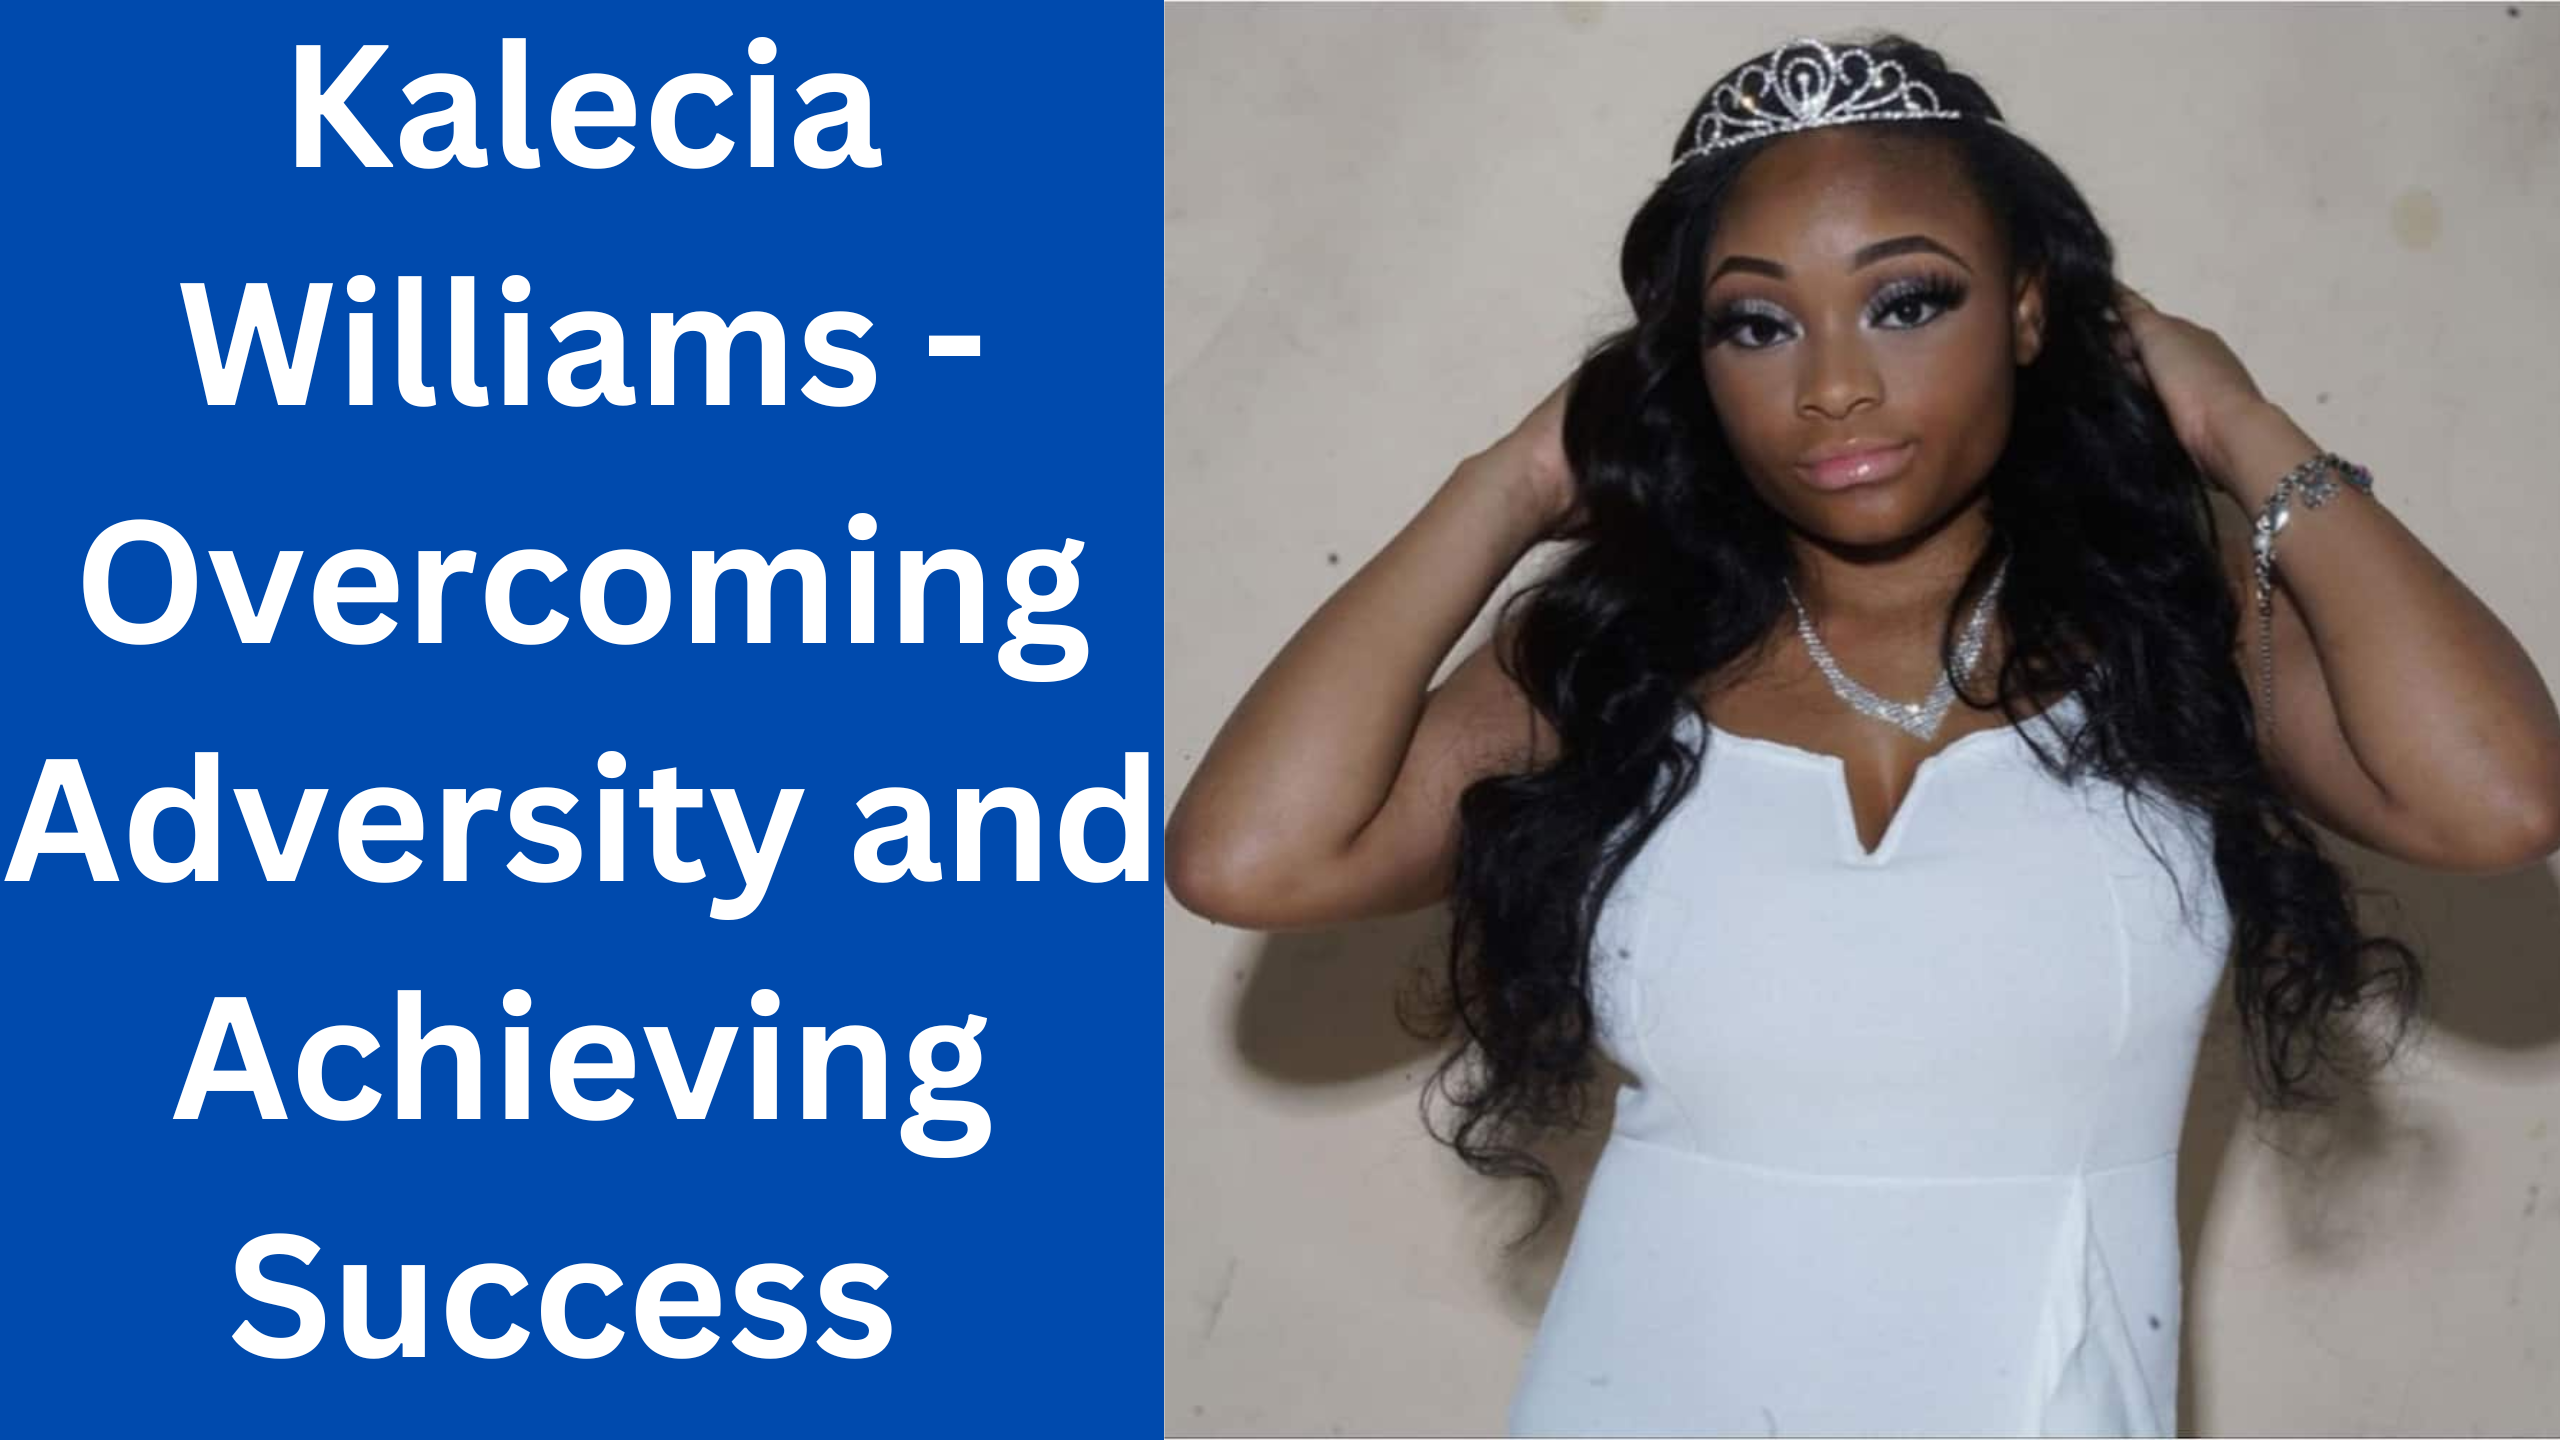 Kalecia Williams - Overcoming Adversity and Achieving Success 